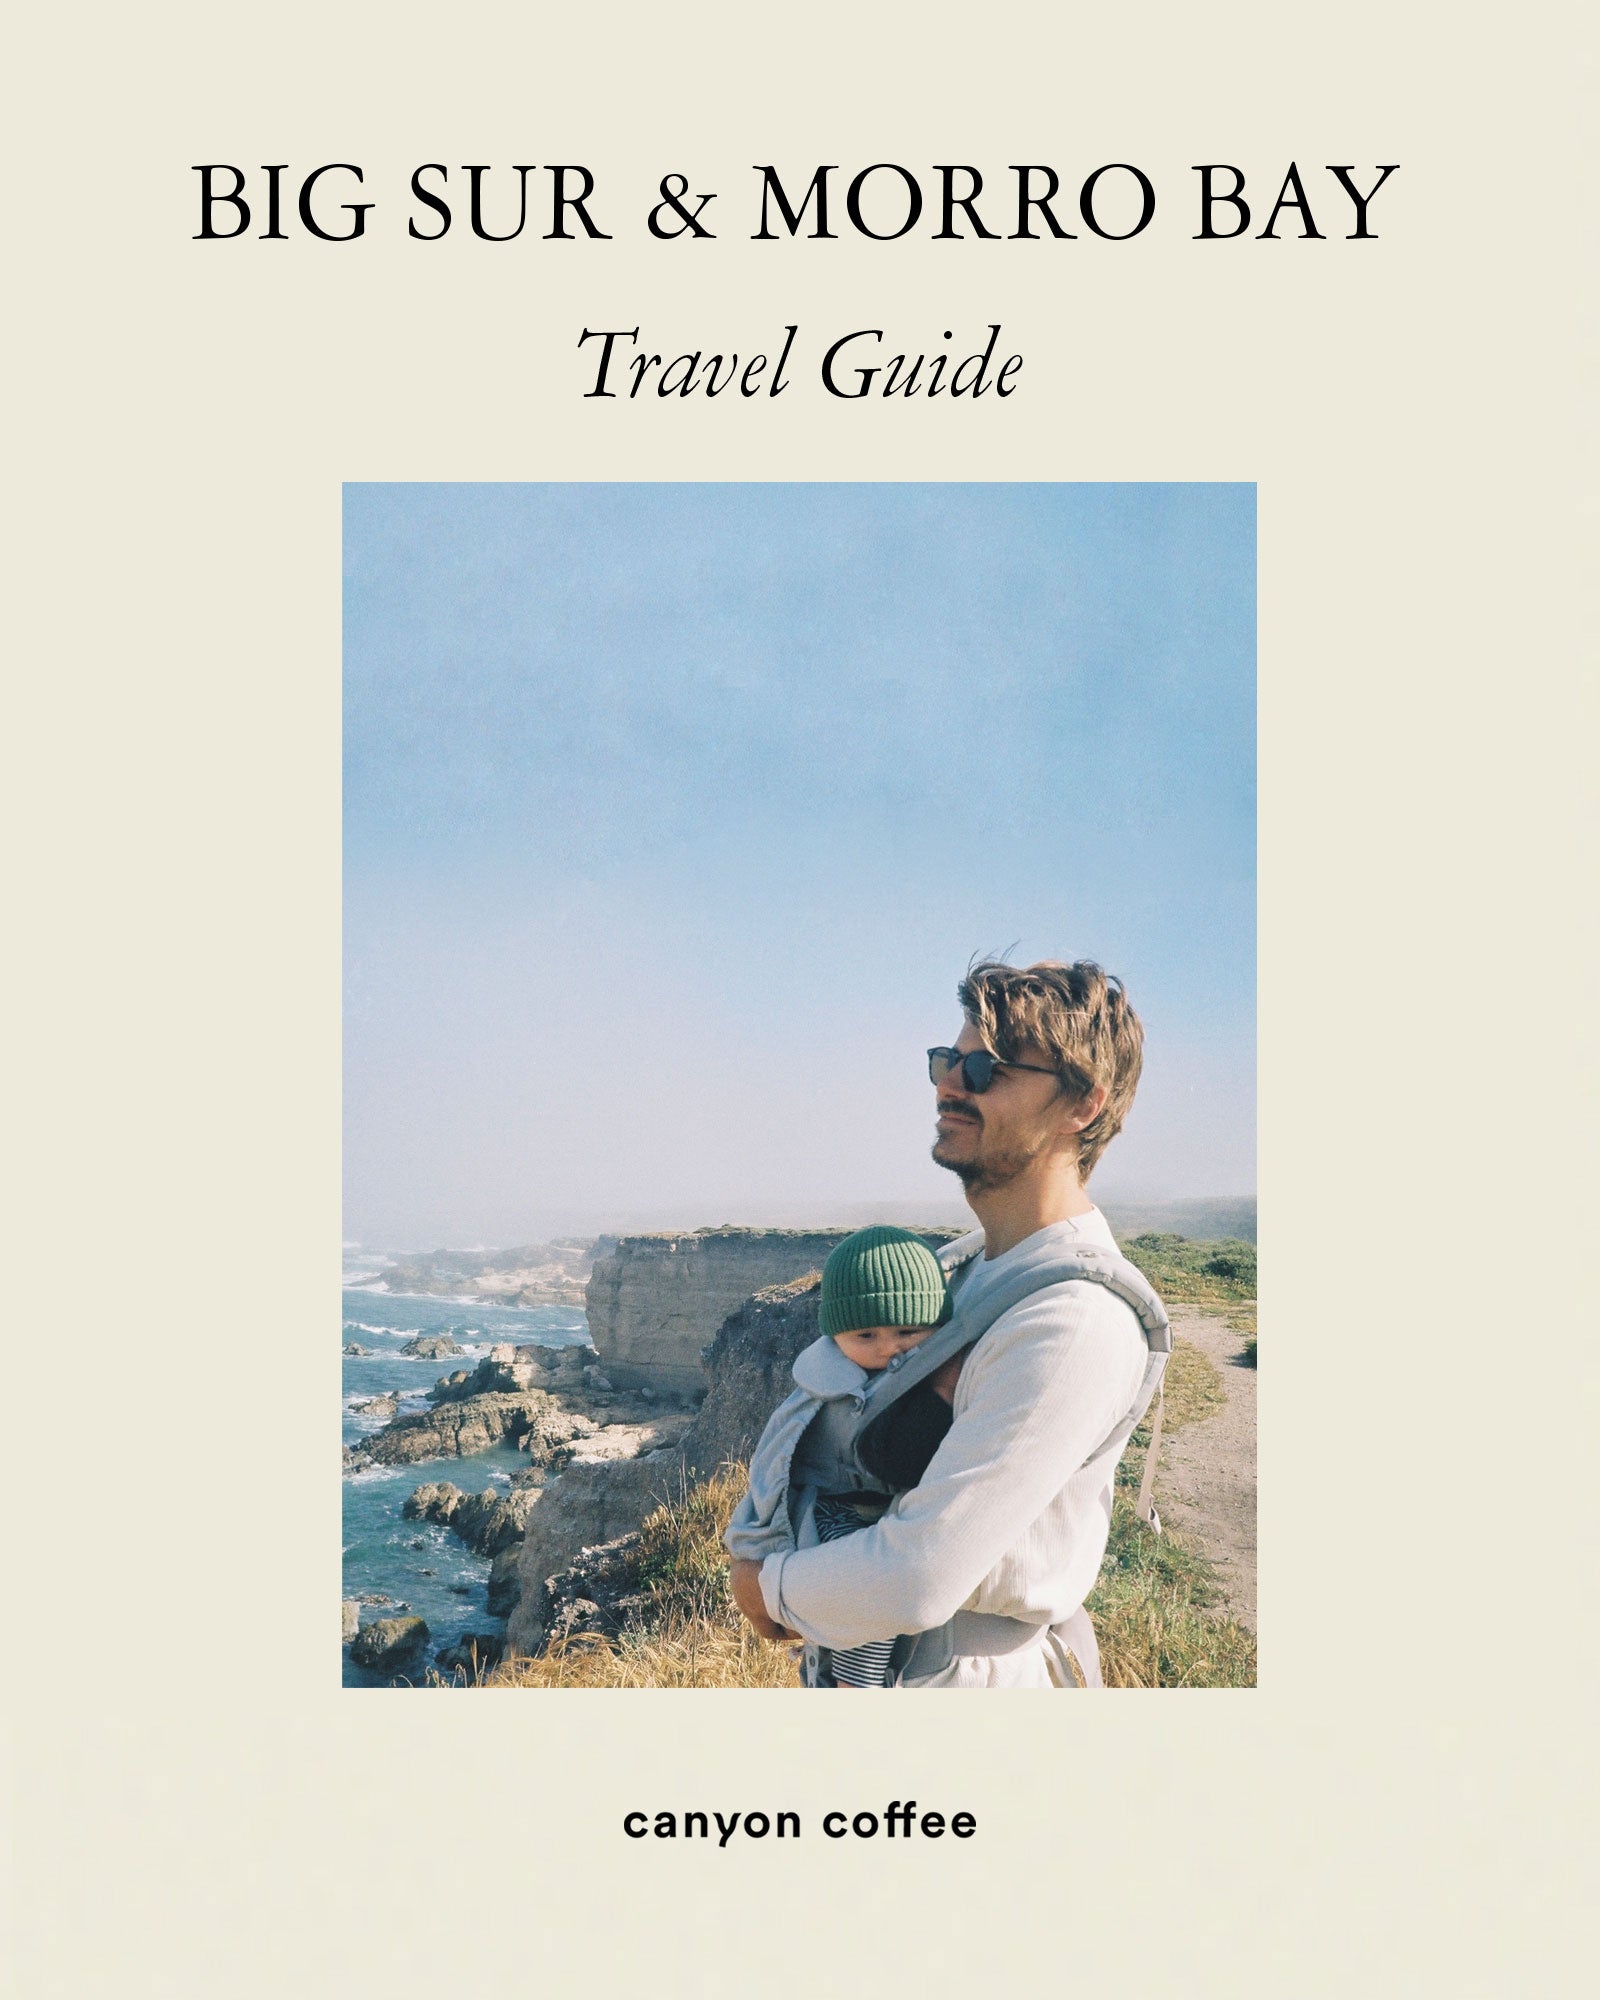 Big Sur and Morro Bay travel guide by Canyon Coffee 